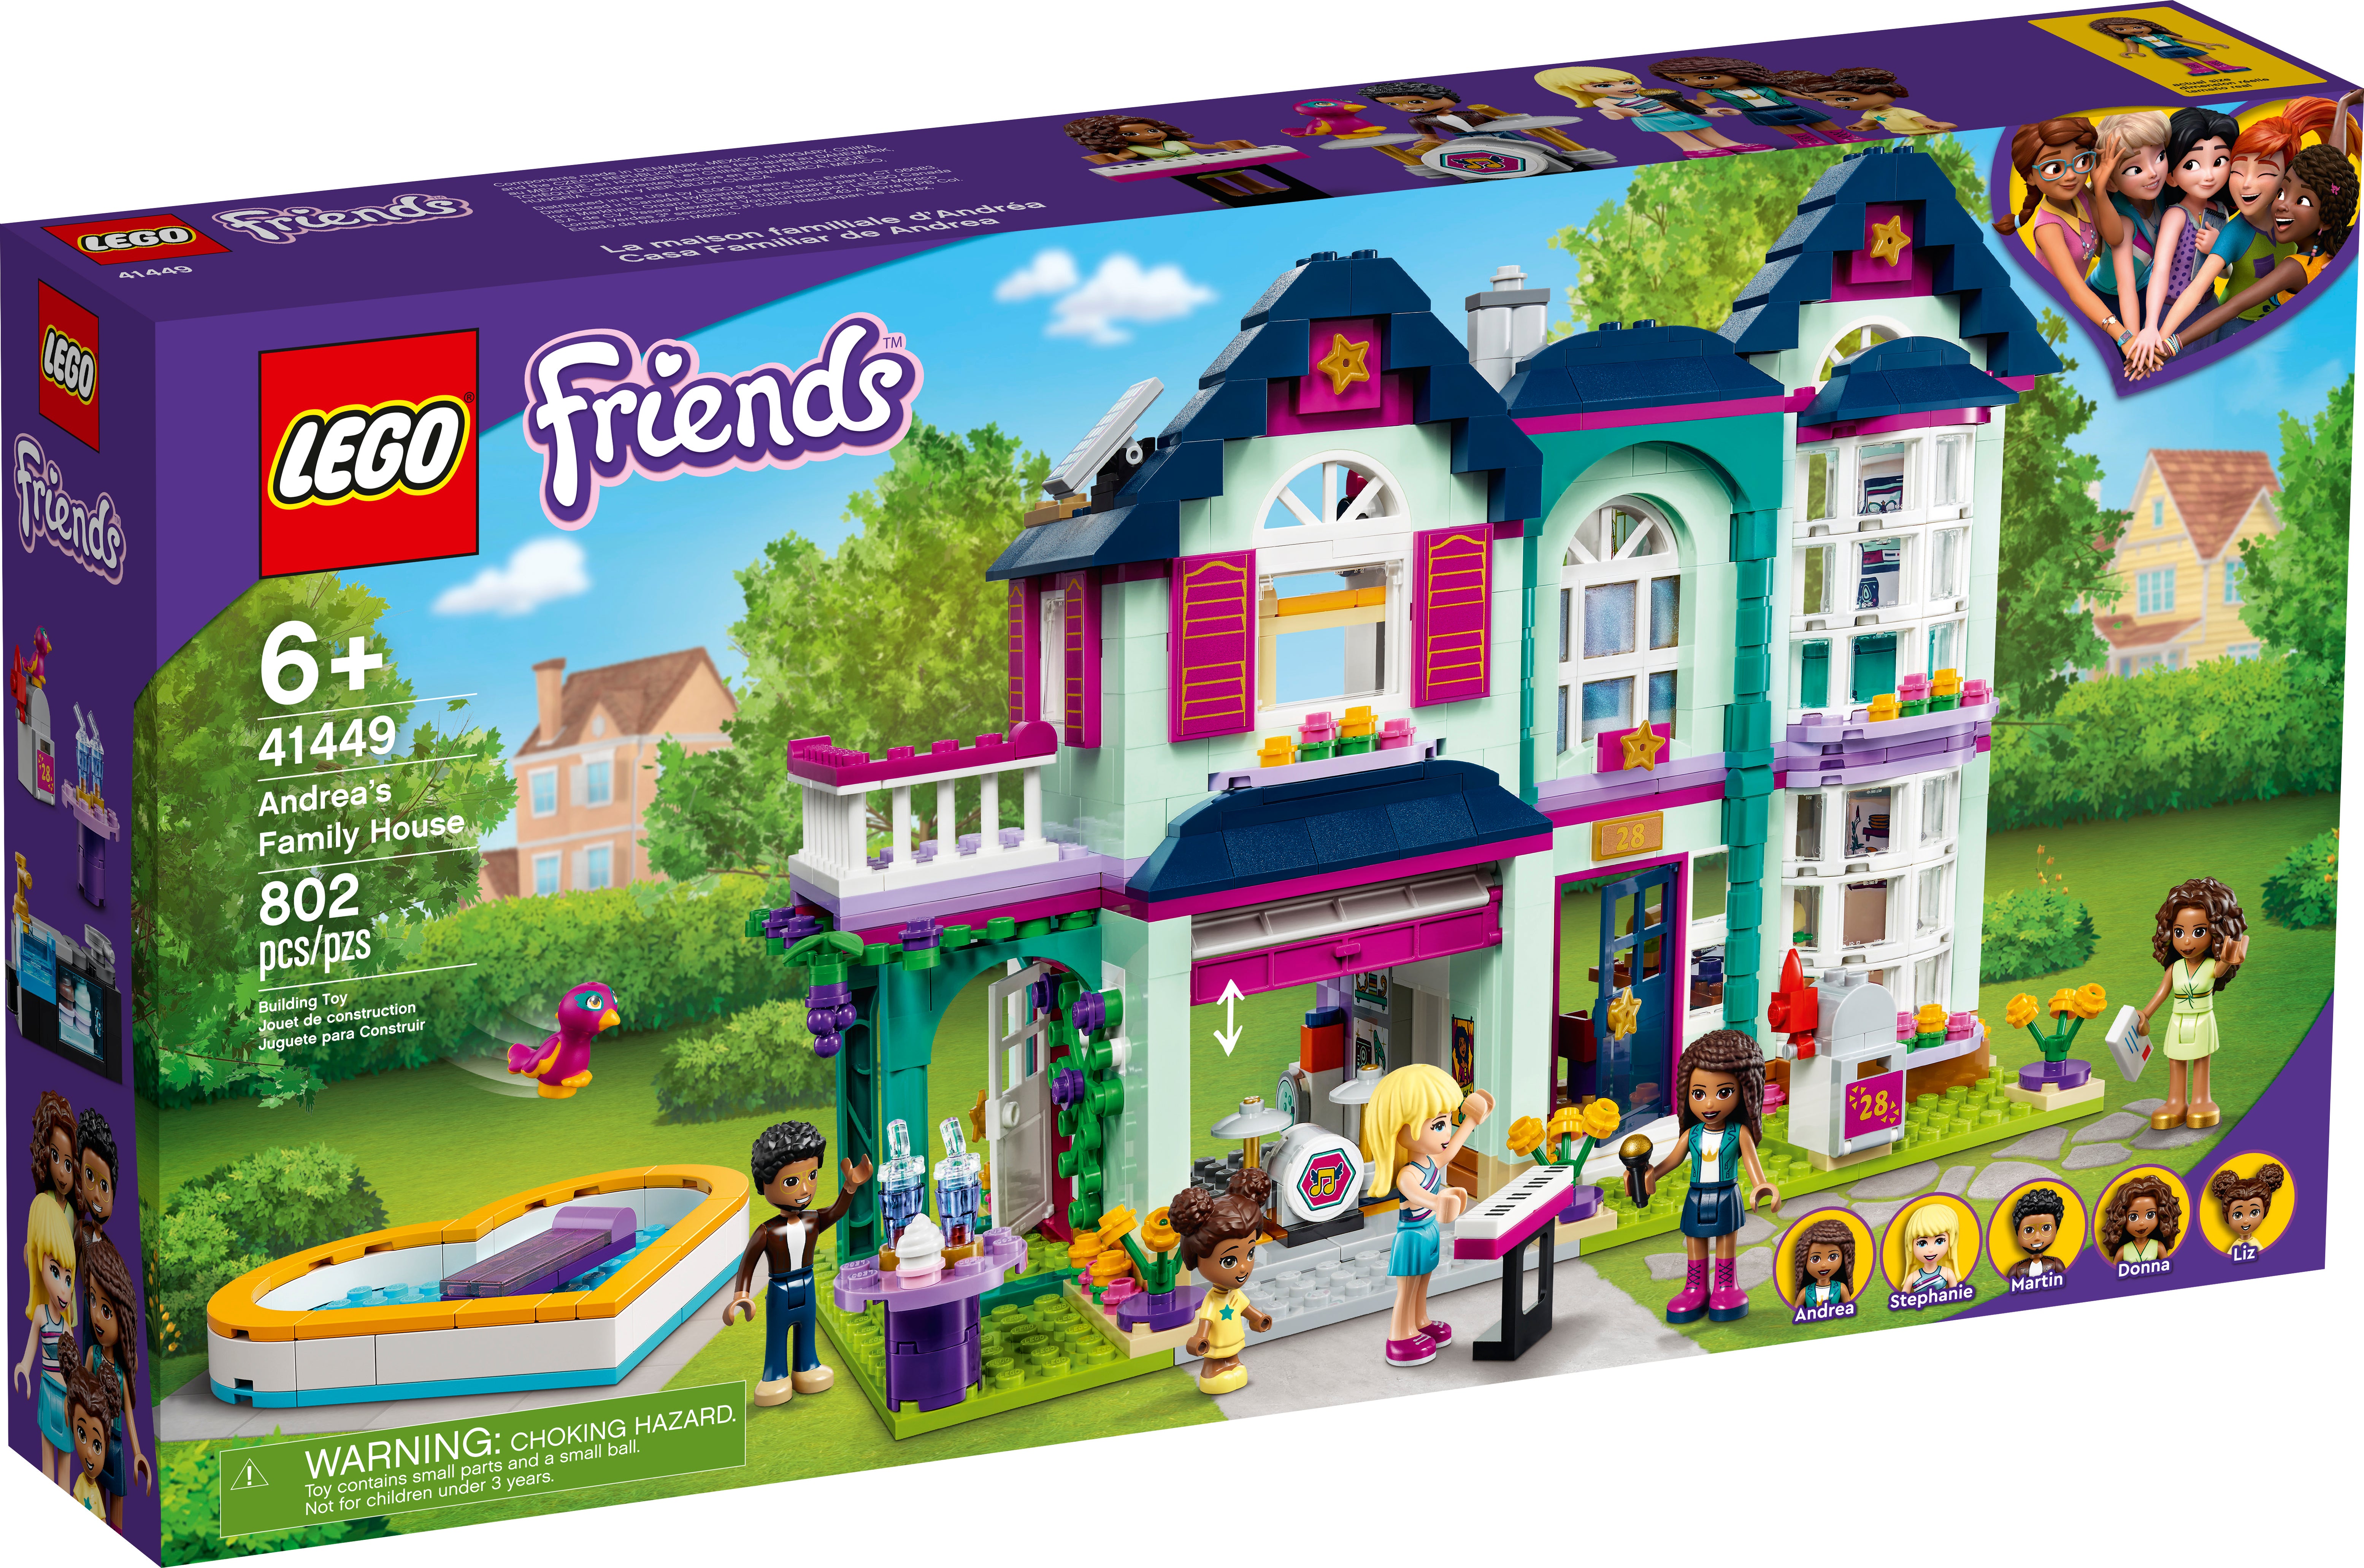 Lego Friends STICKER SHEET ONLY for Lego set 41449 Andrea's Family House New